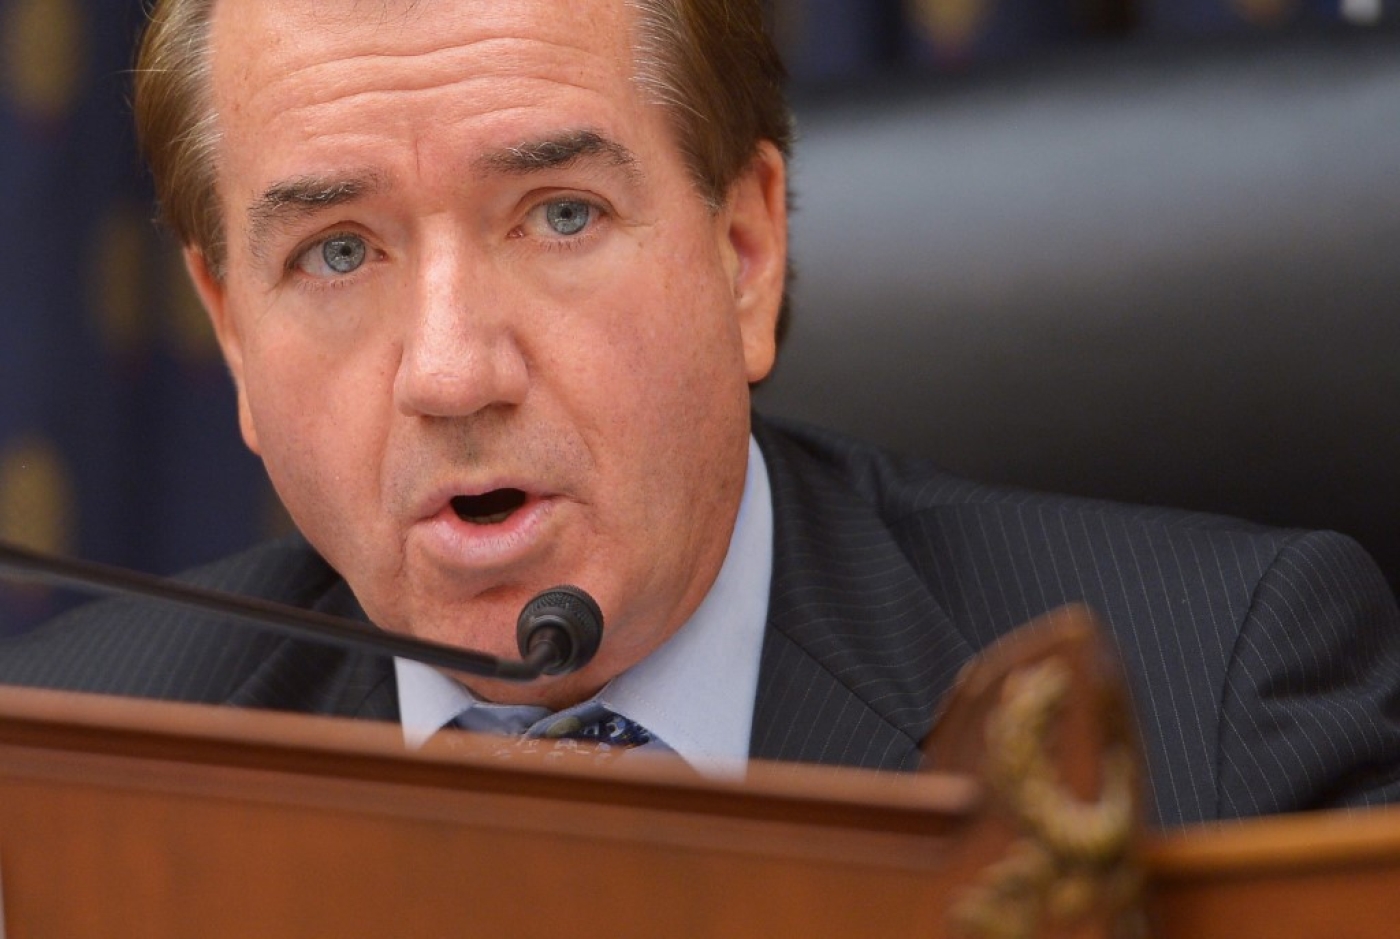 Then-Congressman Edward Royce speaks during a congressional hearing on 23 July 2014